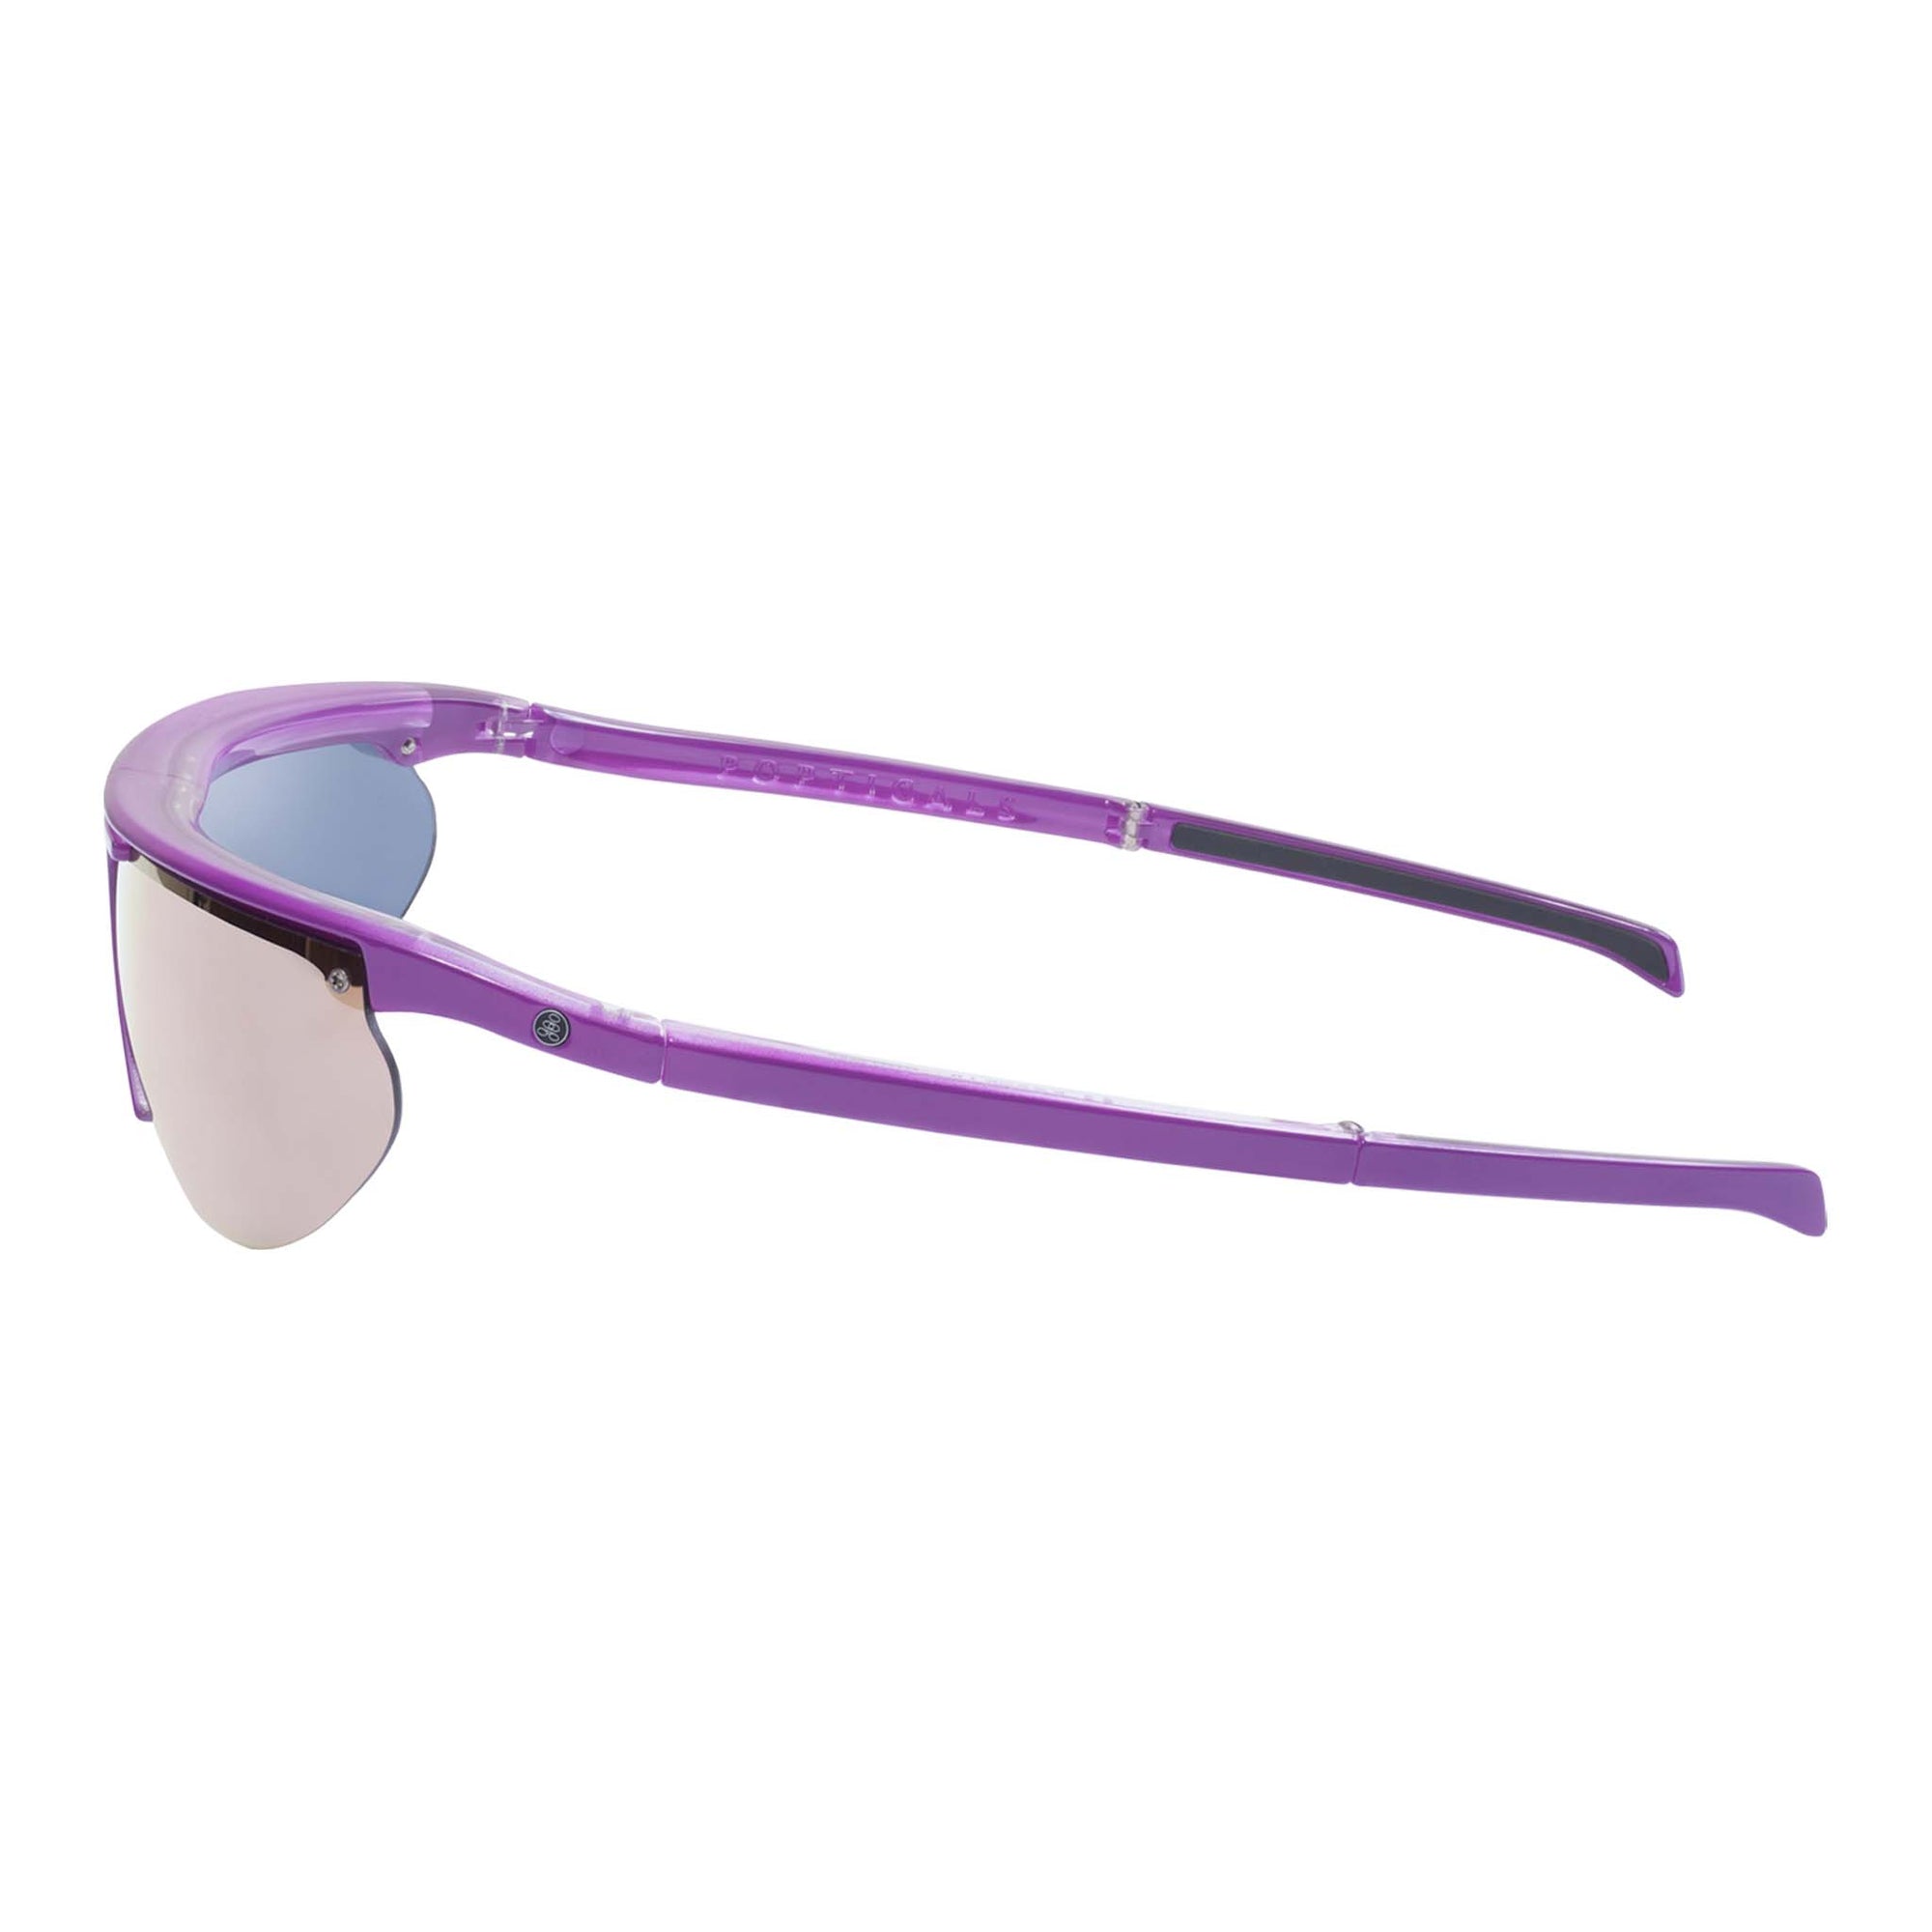 Popticals, Premium Compact Sunglasses, PopTrail, 030081-PFKN, Polarized Sunglasses, Gloss Lavender over Crystal Frame, Gray Lenses w/Pink Mirror Finish, Side View